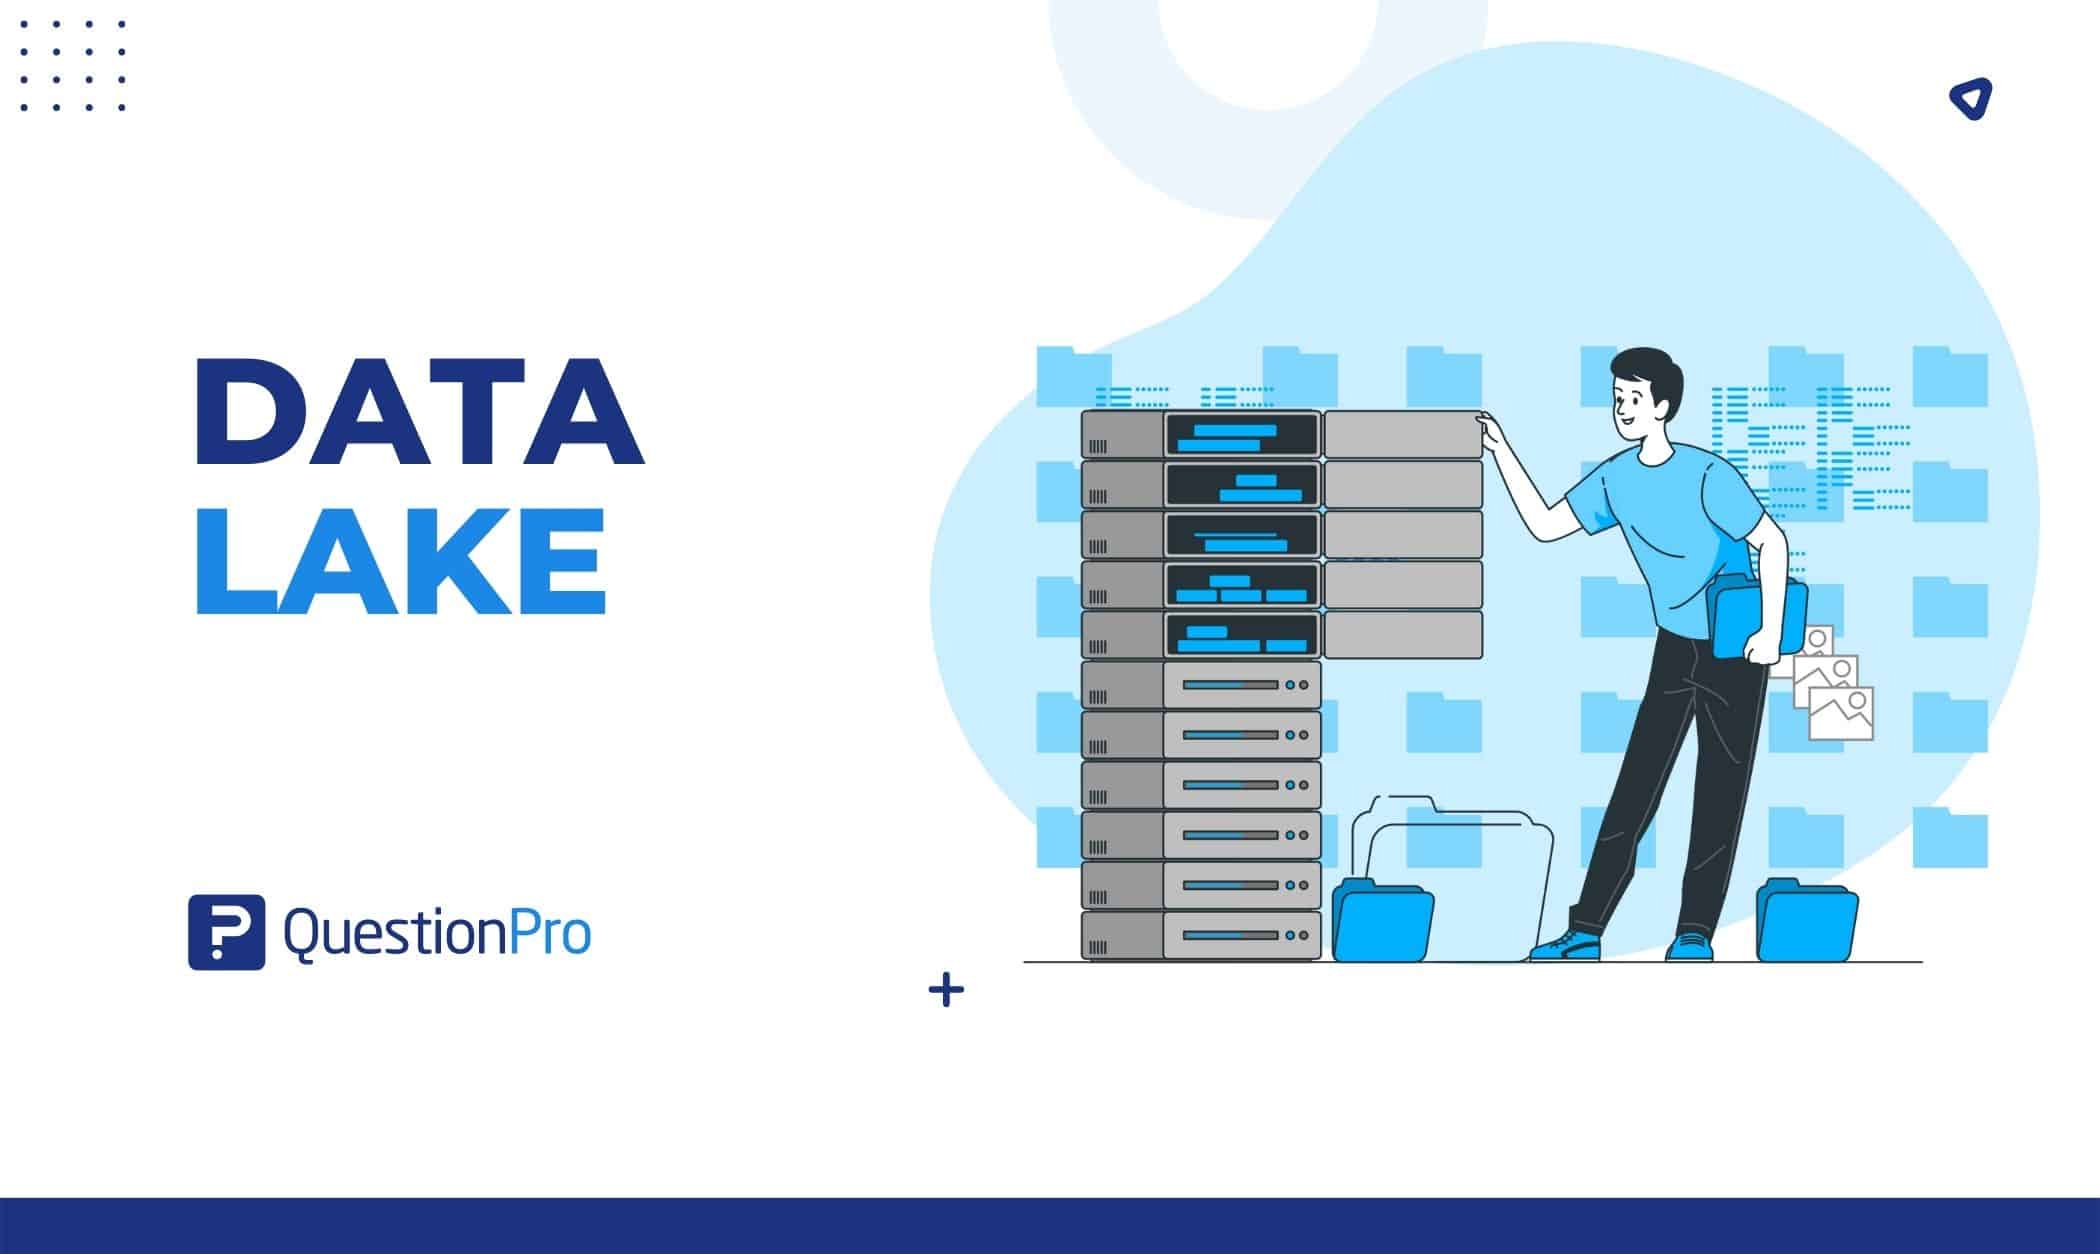 A data lake contains massive, raw data sets in their native format. One benefit is that they eliminate data modeling during import.